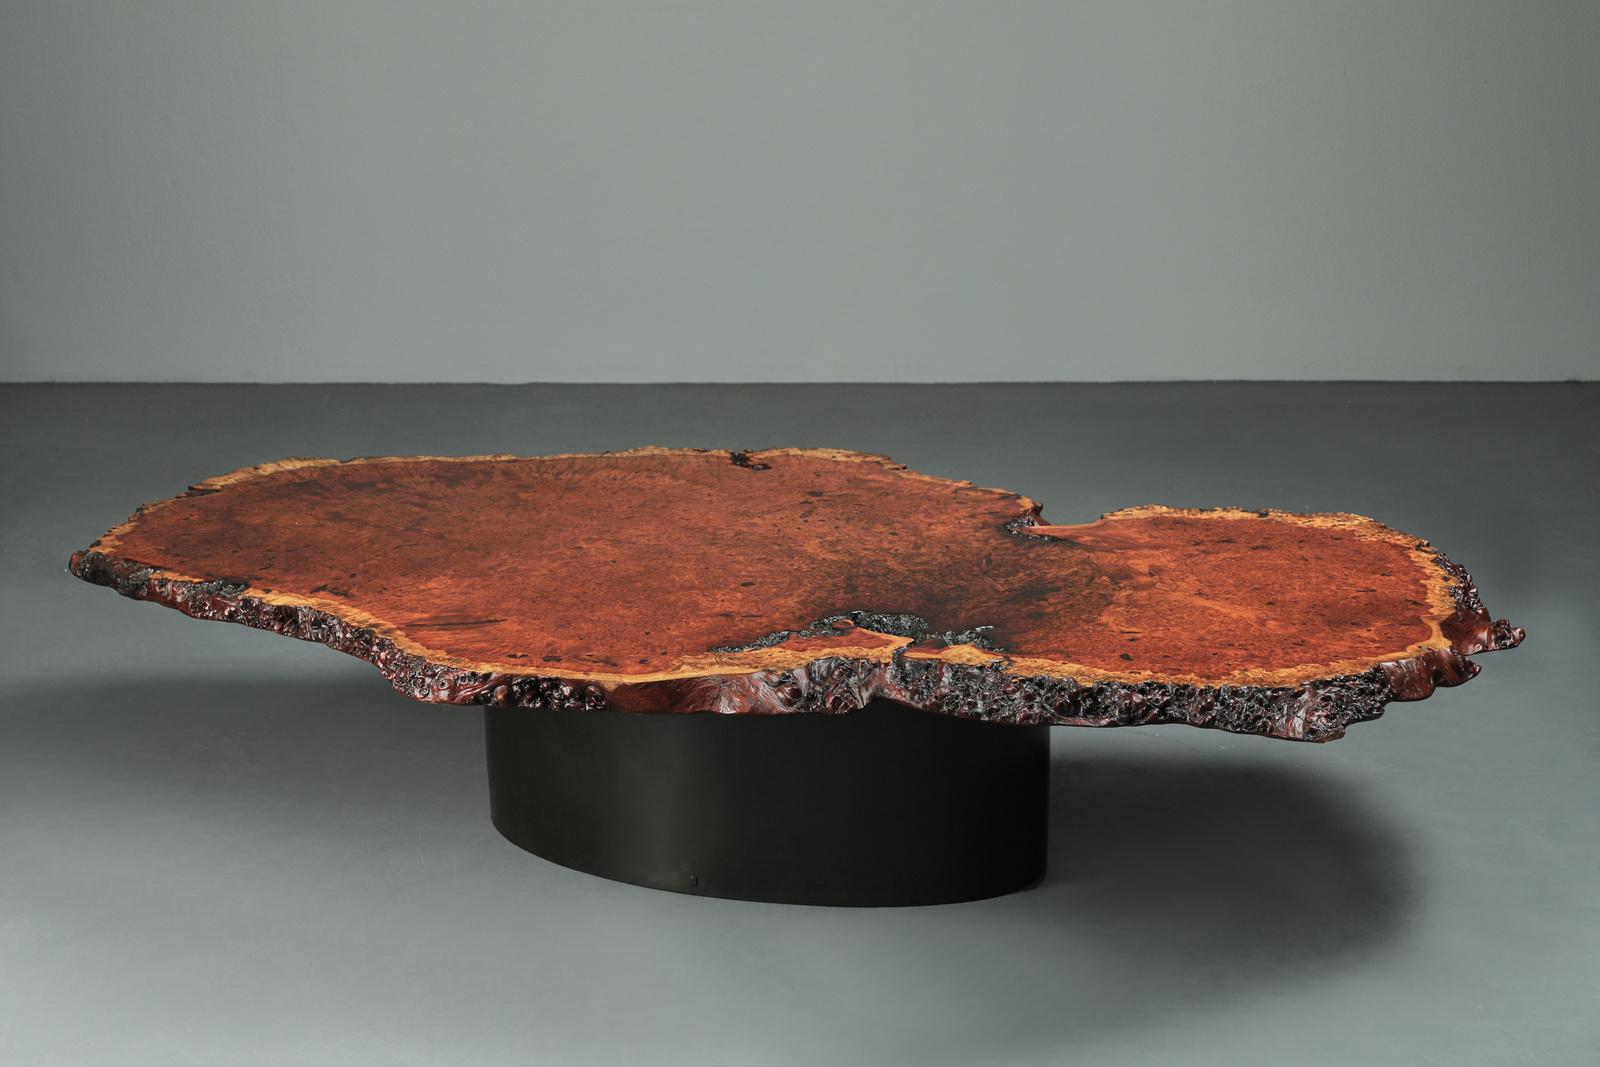 19th century burlwood tea ceremony table top from Kyoto with exceptional burl and live-edges, raised on custom cast bronze elliptical base. The wood is a single unique piece without any cutting. It would have been selected in Japan decades ago as an